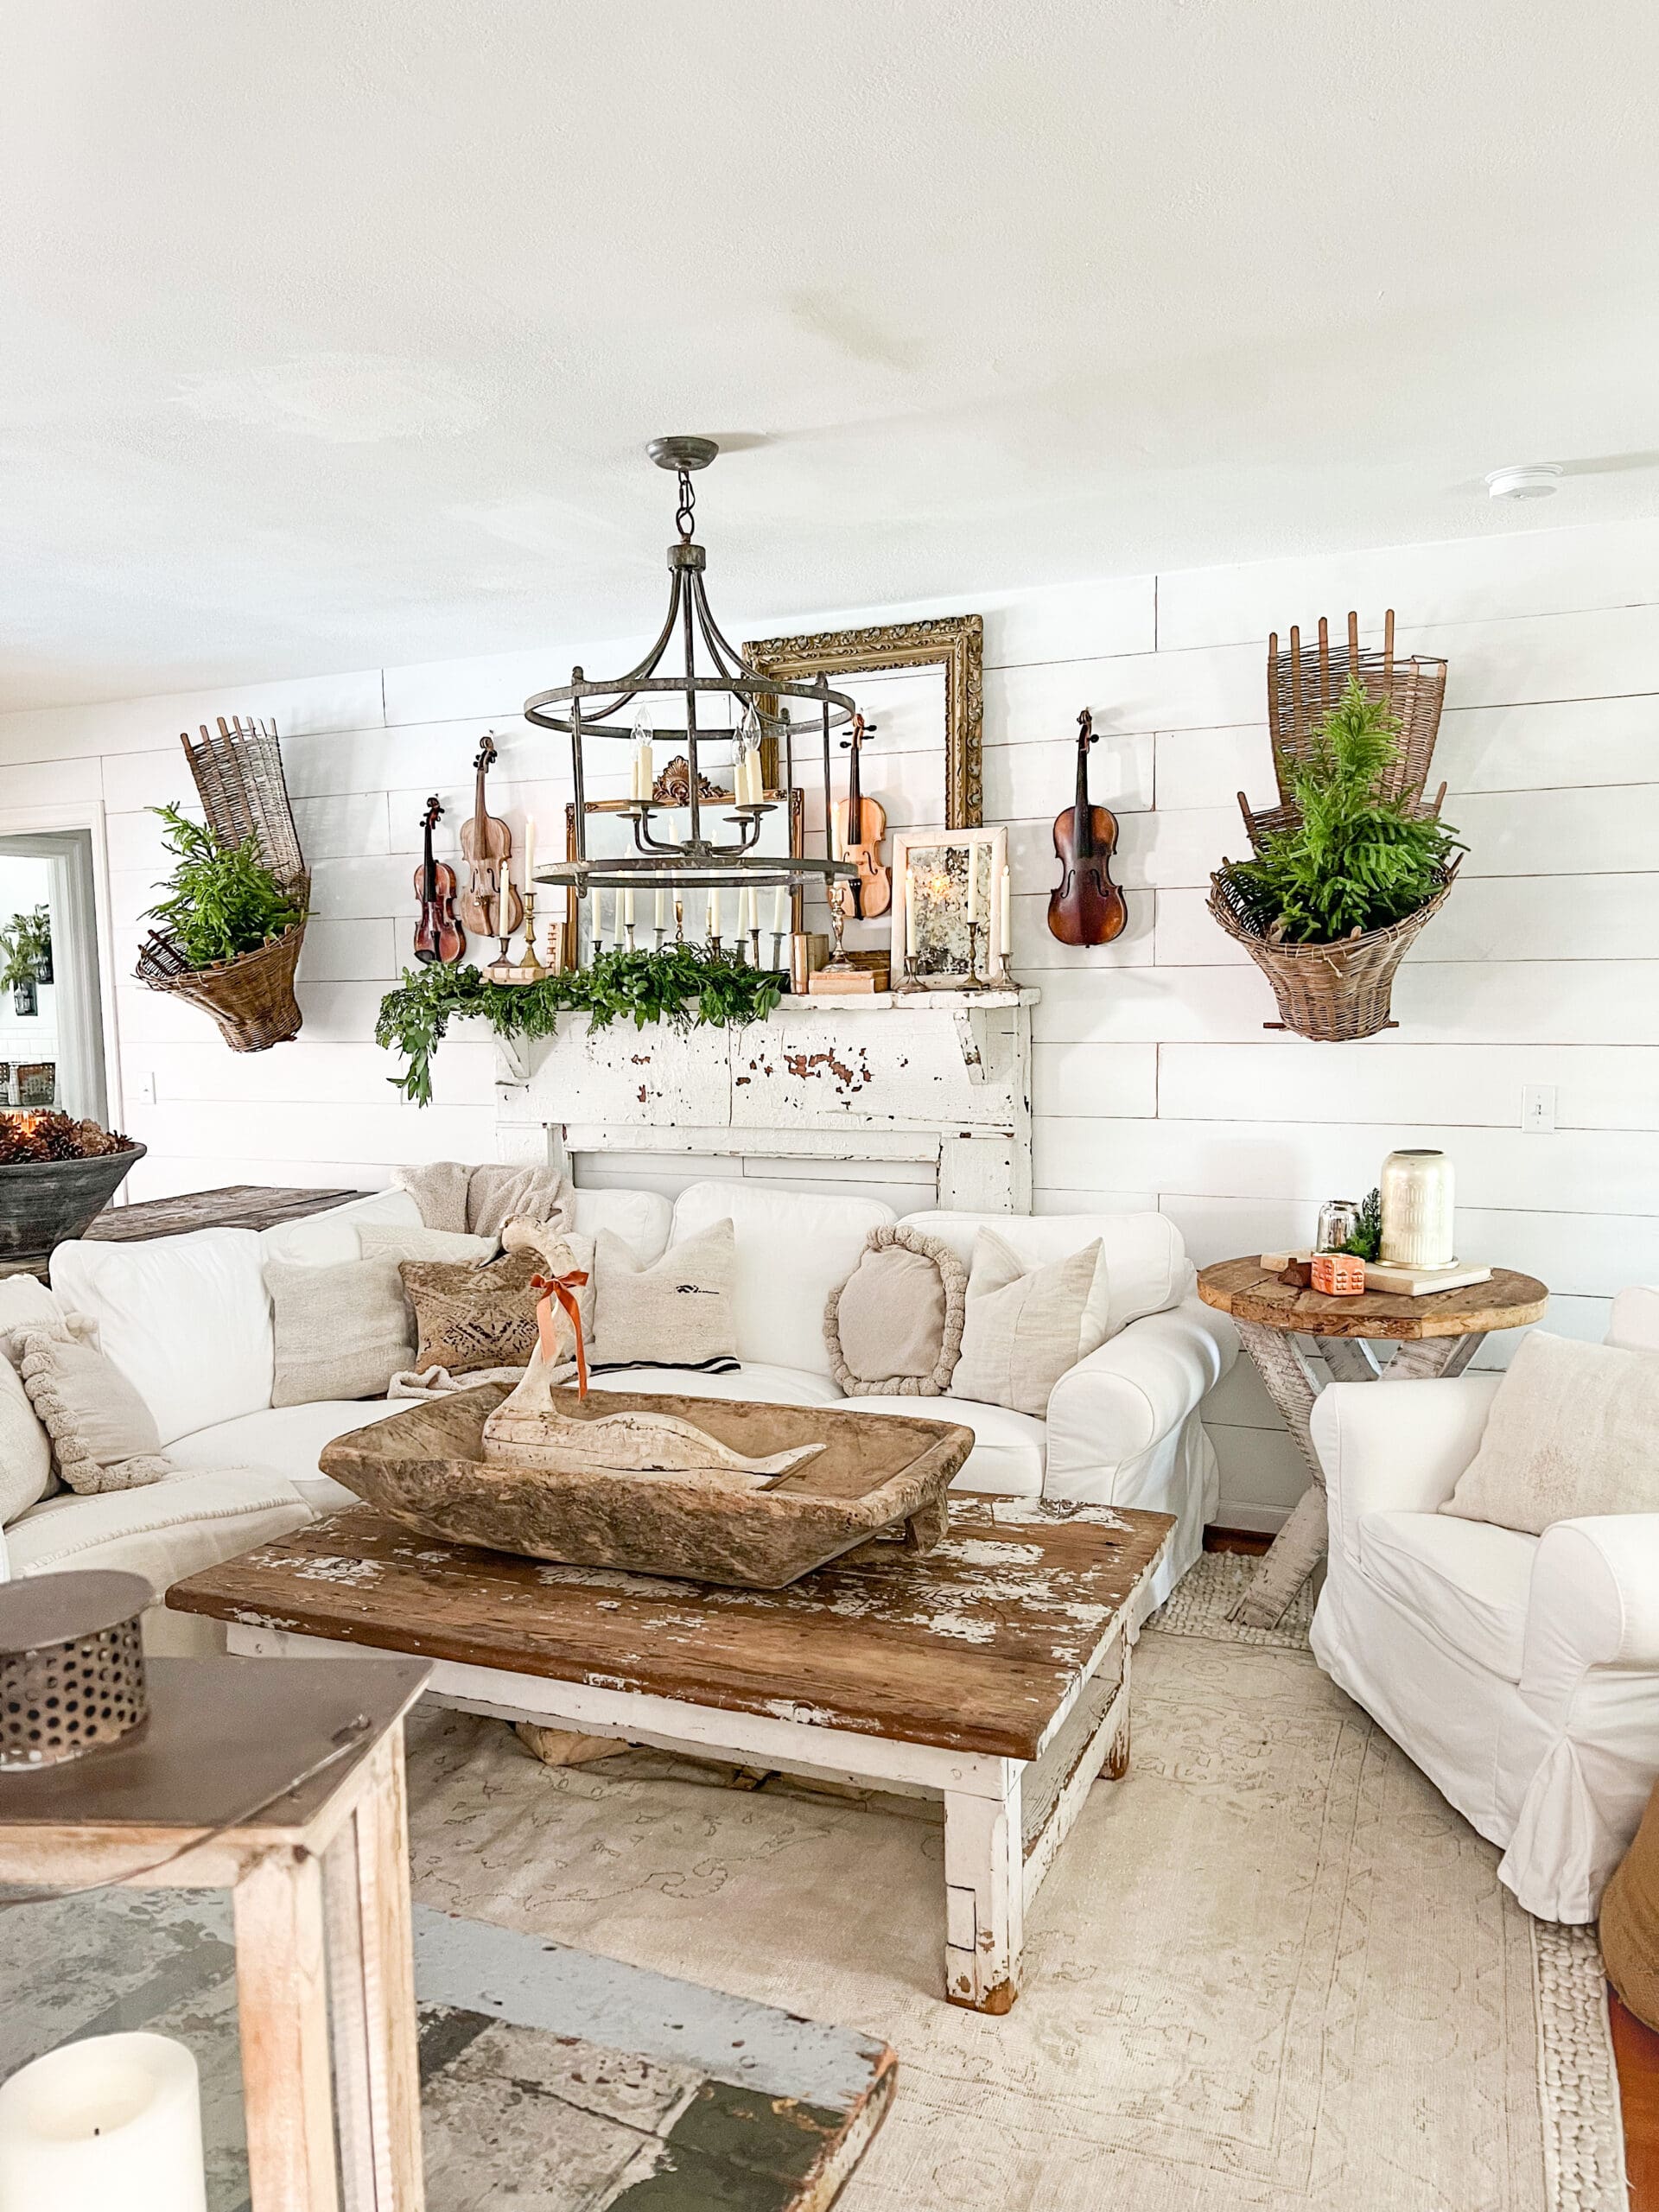 family room styled for winter with small winter trees hanging in baskets on a wall and a gallery wall with winter decor